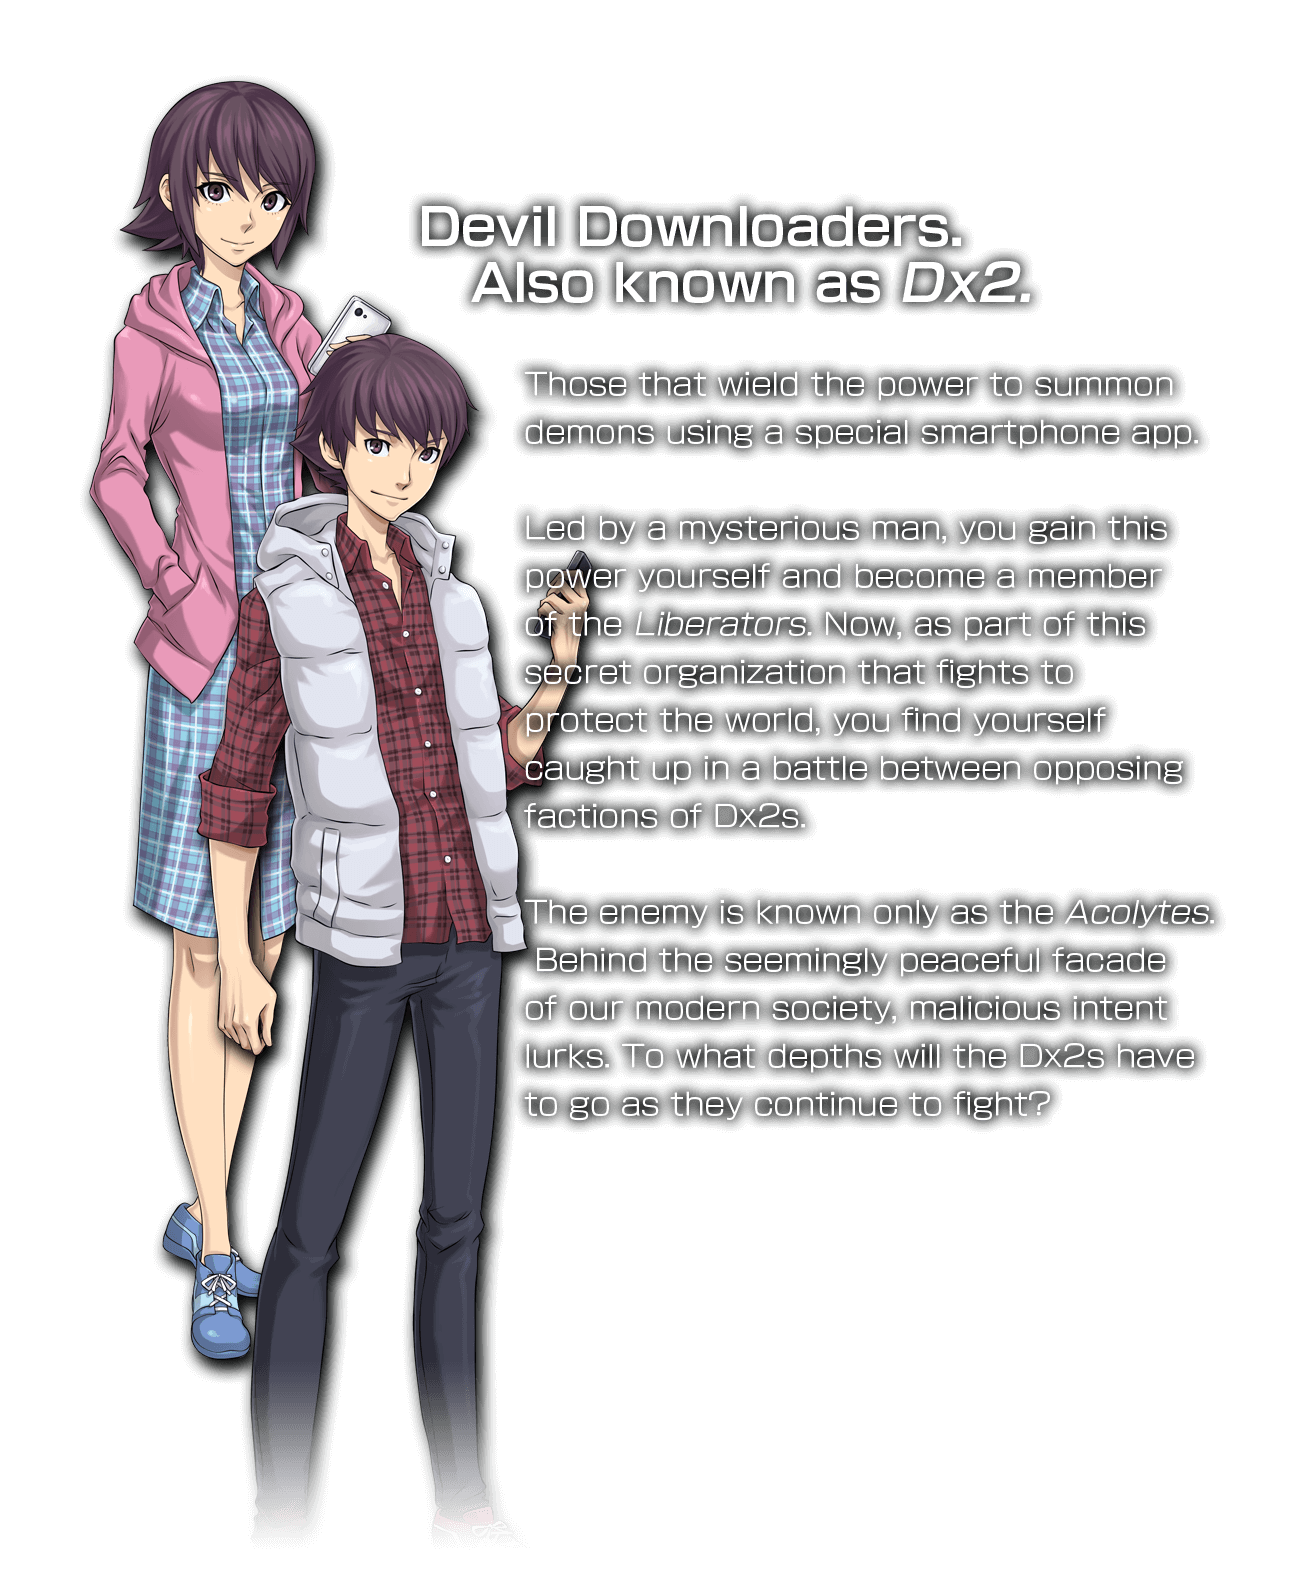 Devil Downloaders.Also known as Dx2.Those that wield the power to summon demons using a special smartphone app.Led by a mysterious man, you gain this power yourself and become a member of the Liberators. Now, as part of this secret organization that fights to protect the world, you find yourself caught up in a battle between opposing factions of Dx2s.The enemy is known only as the Acolytes.Behind the seemingly peaceful facade of our modern society, malicious intent lurks. To what depths will the Dx2s have to go as they continue to fight?